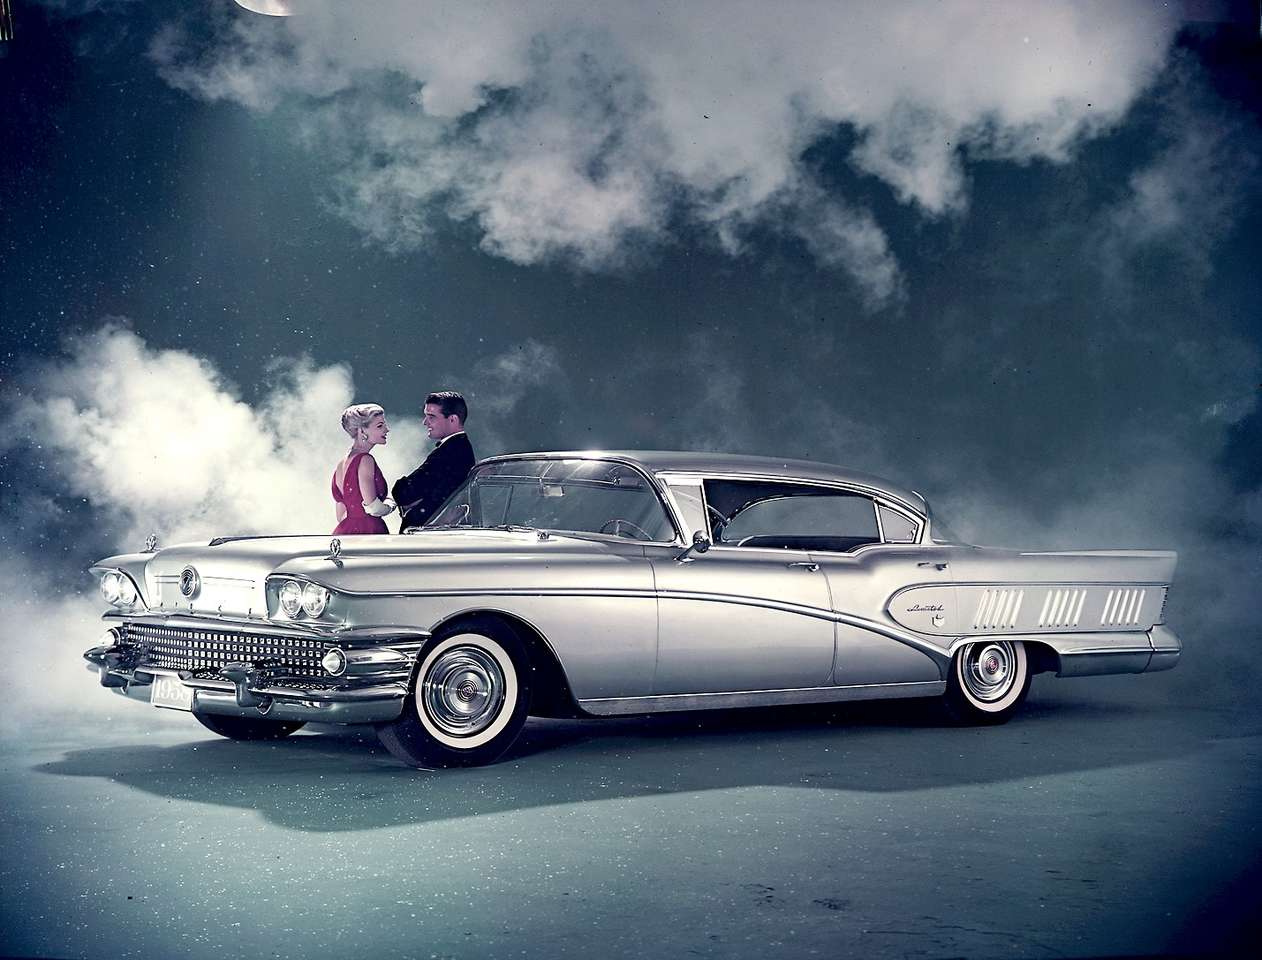 1958 Buick Limited. online puzzle